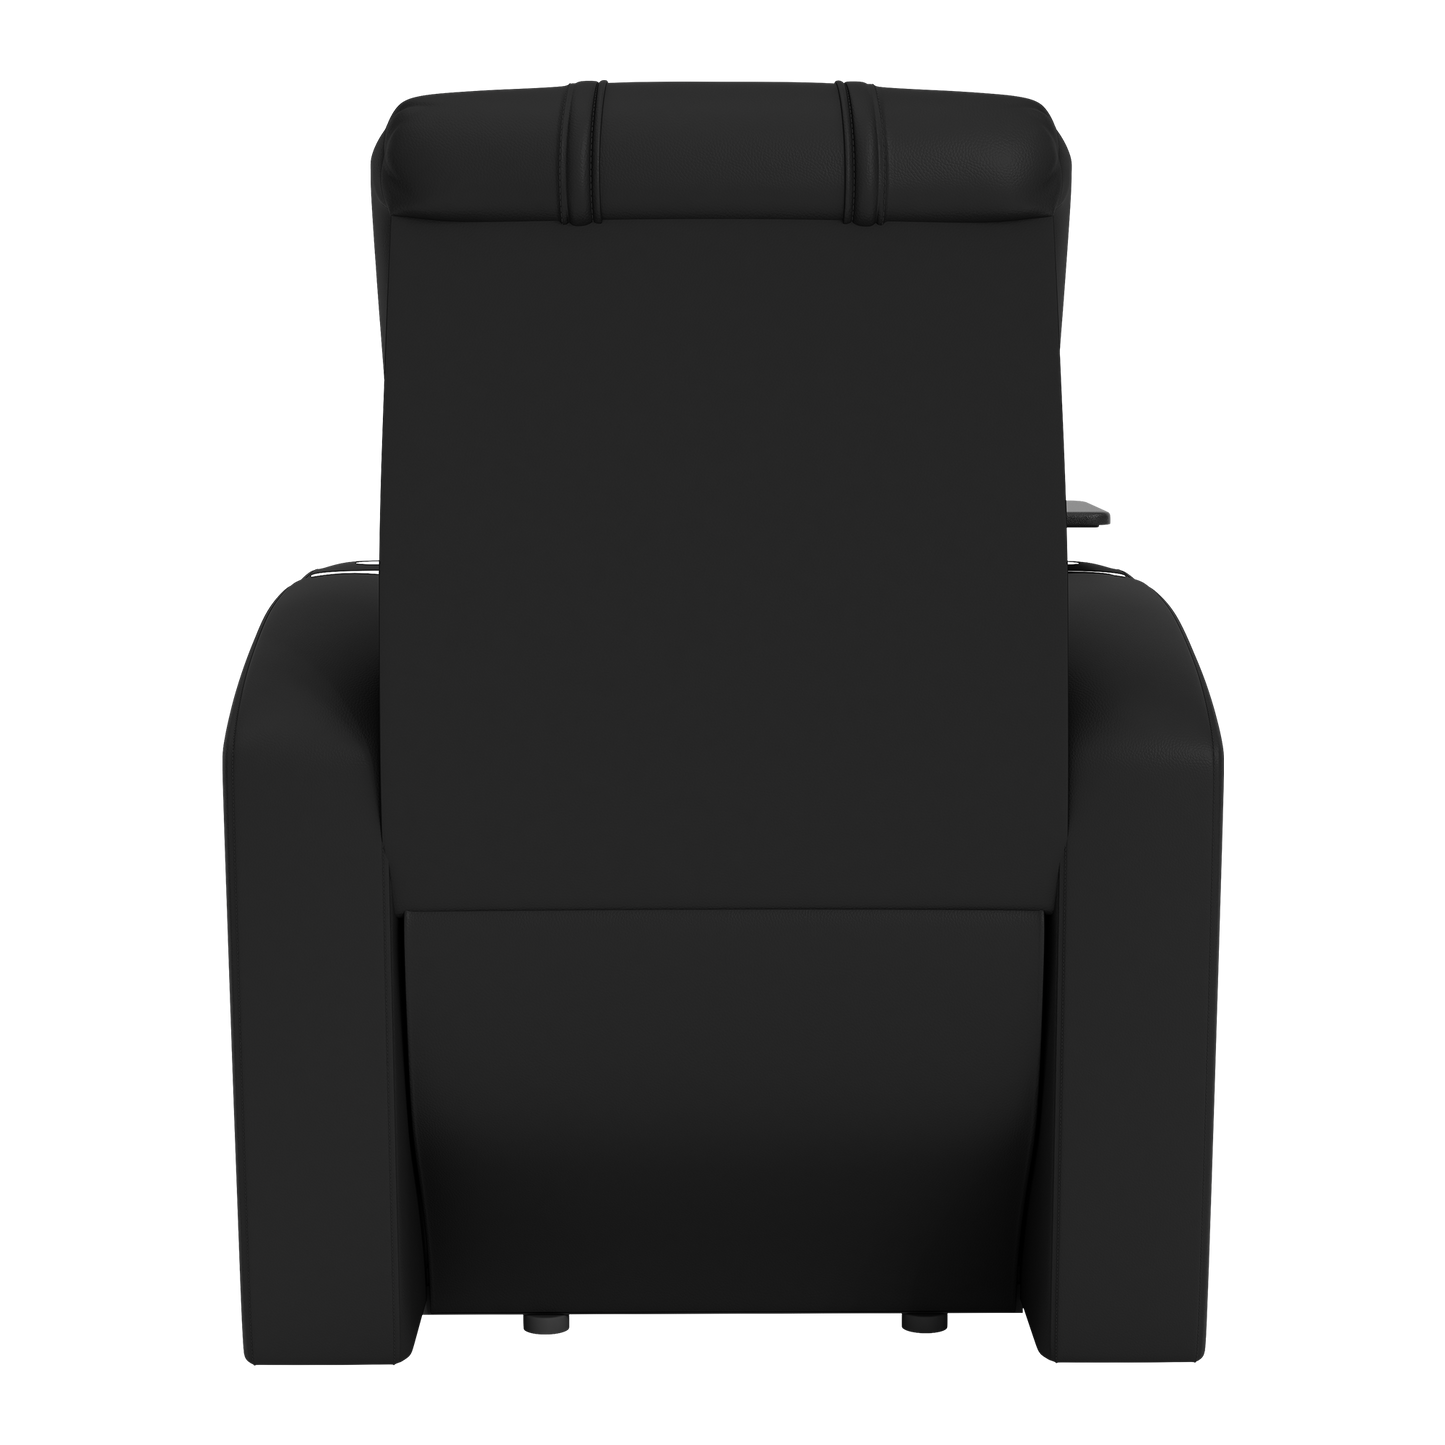 Stealth Power Plus Recliner with Virginia Cavaliers Secondary Logo